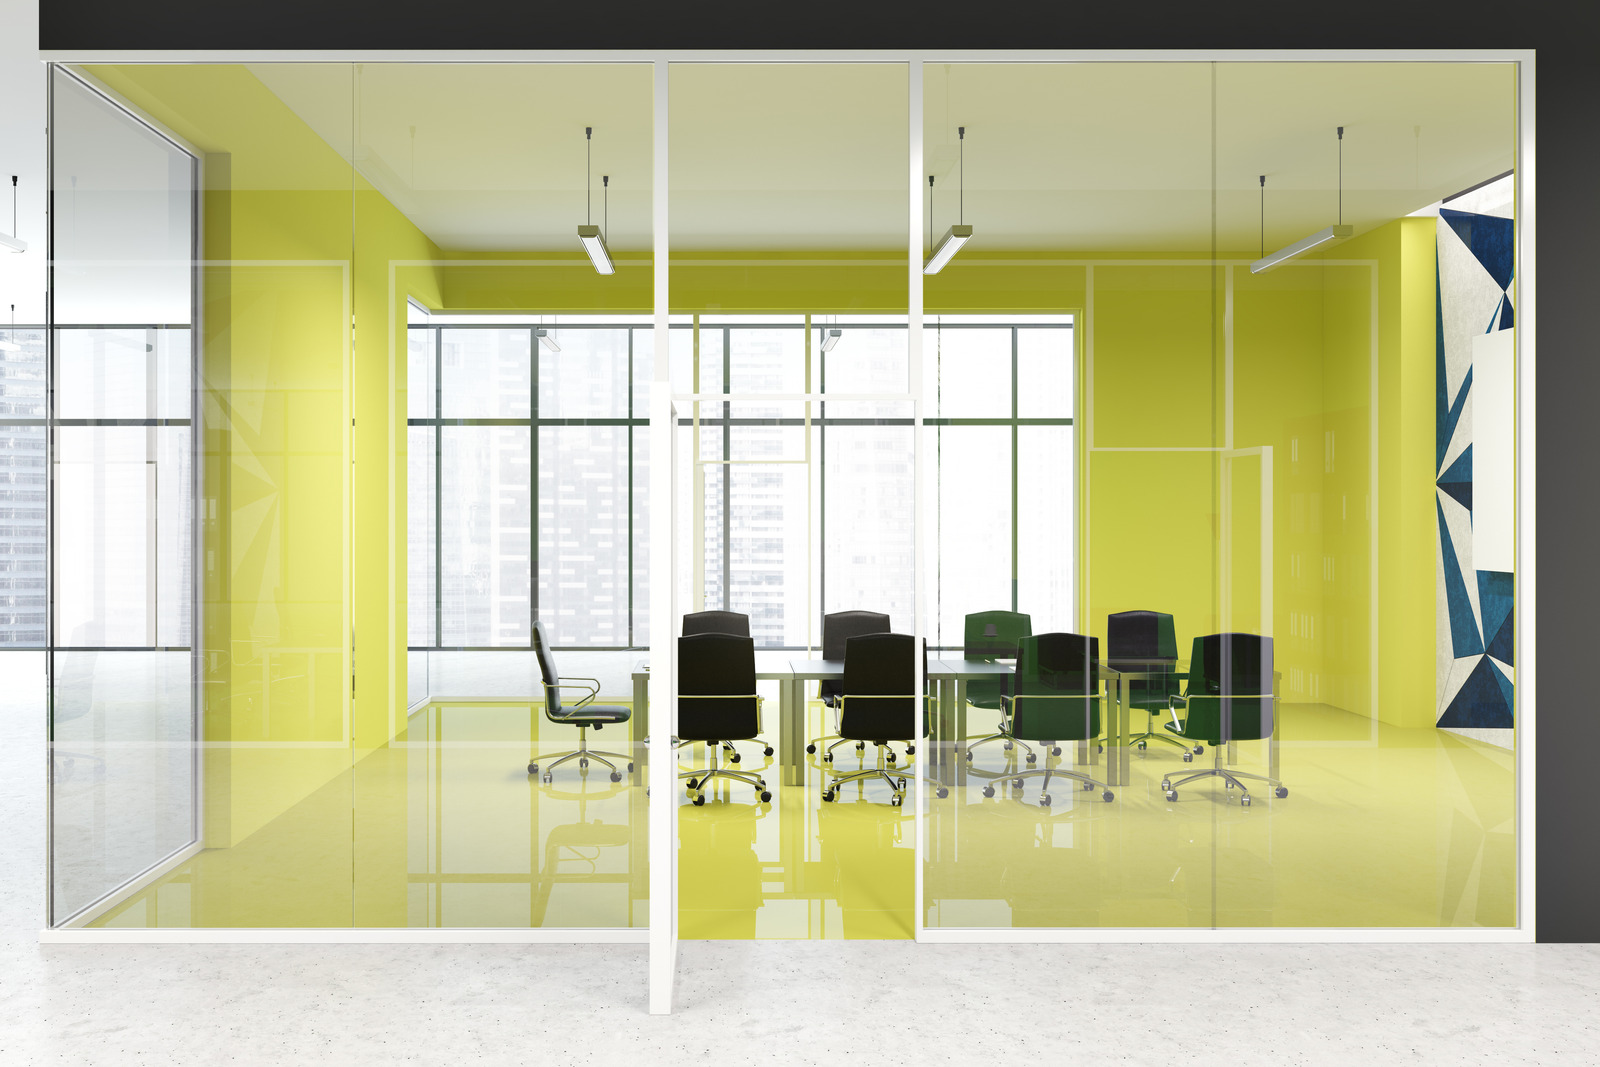 Bright yellow office conference room interior